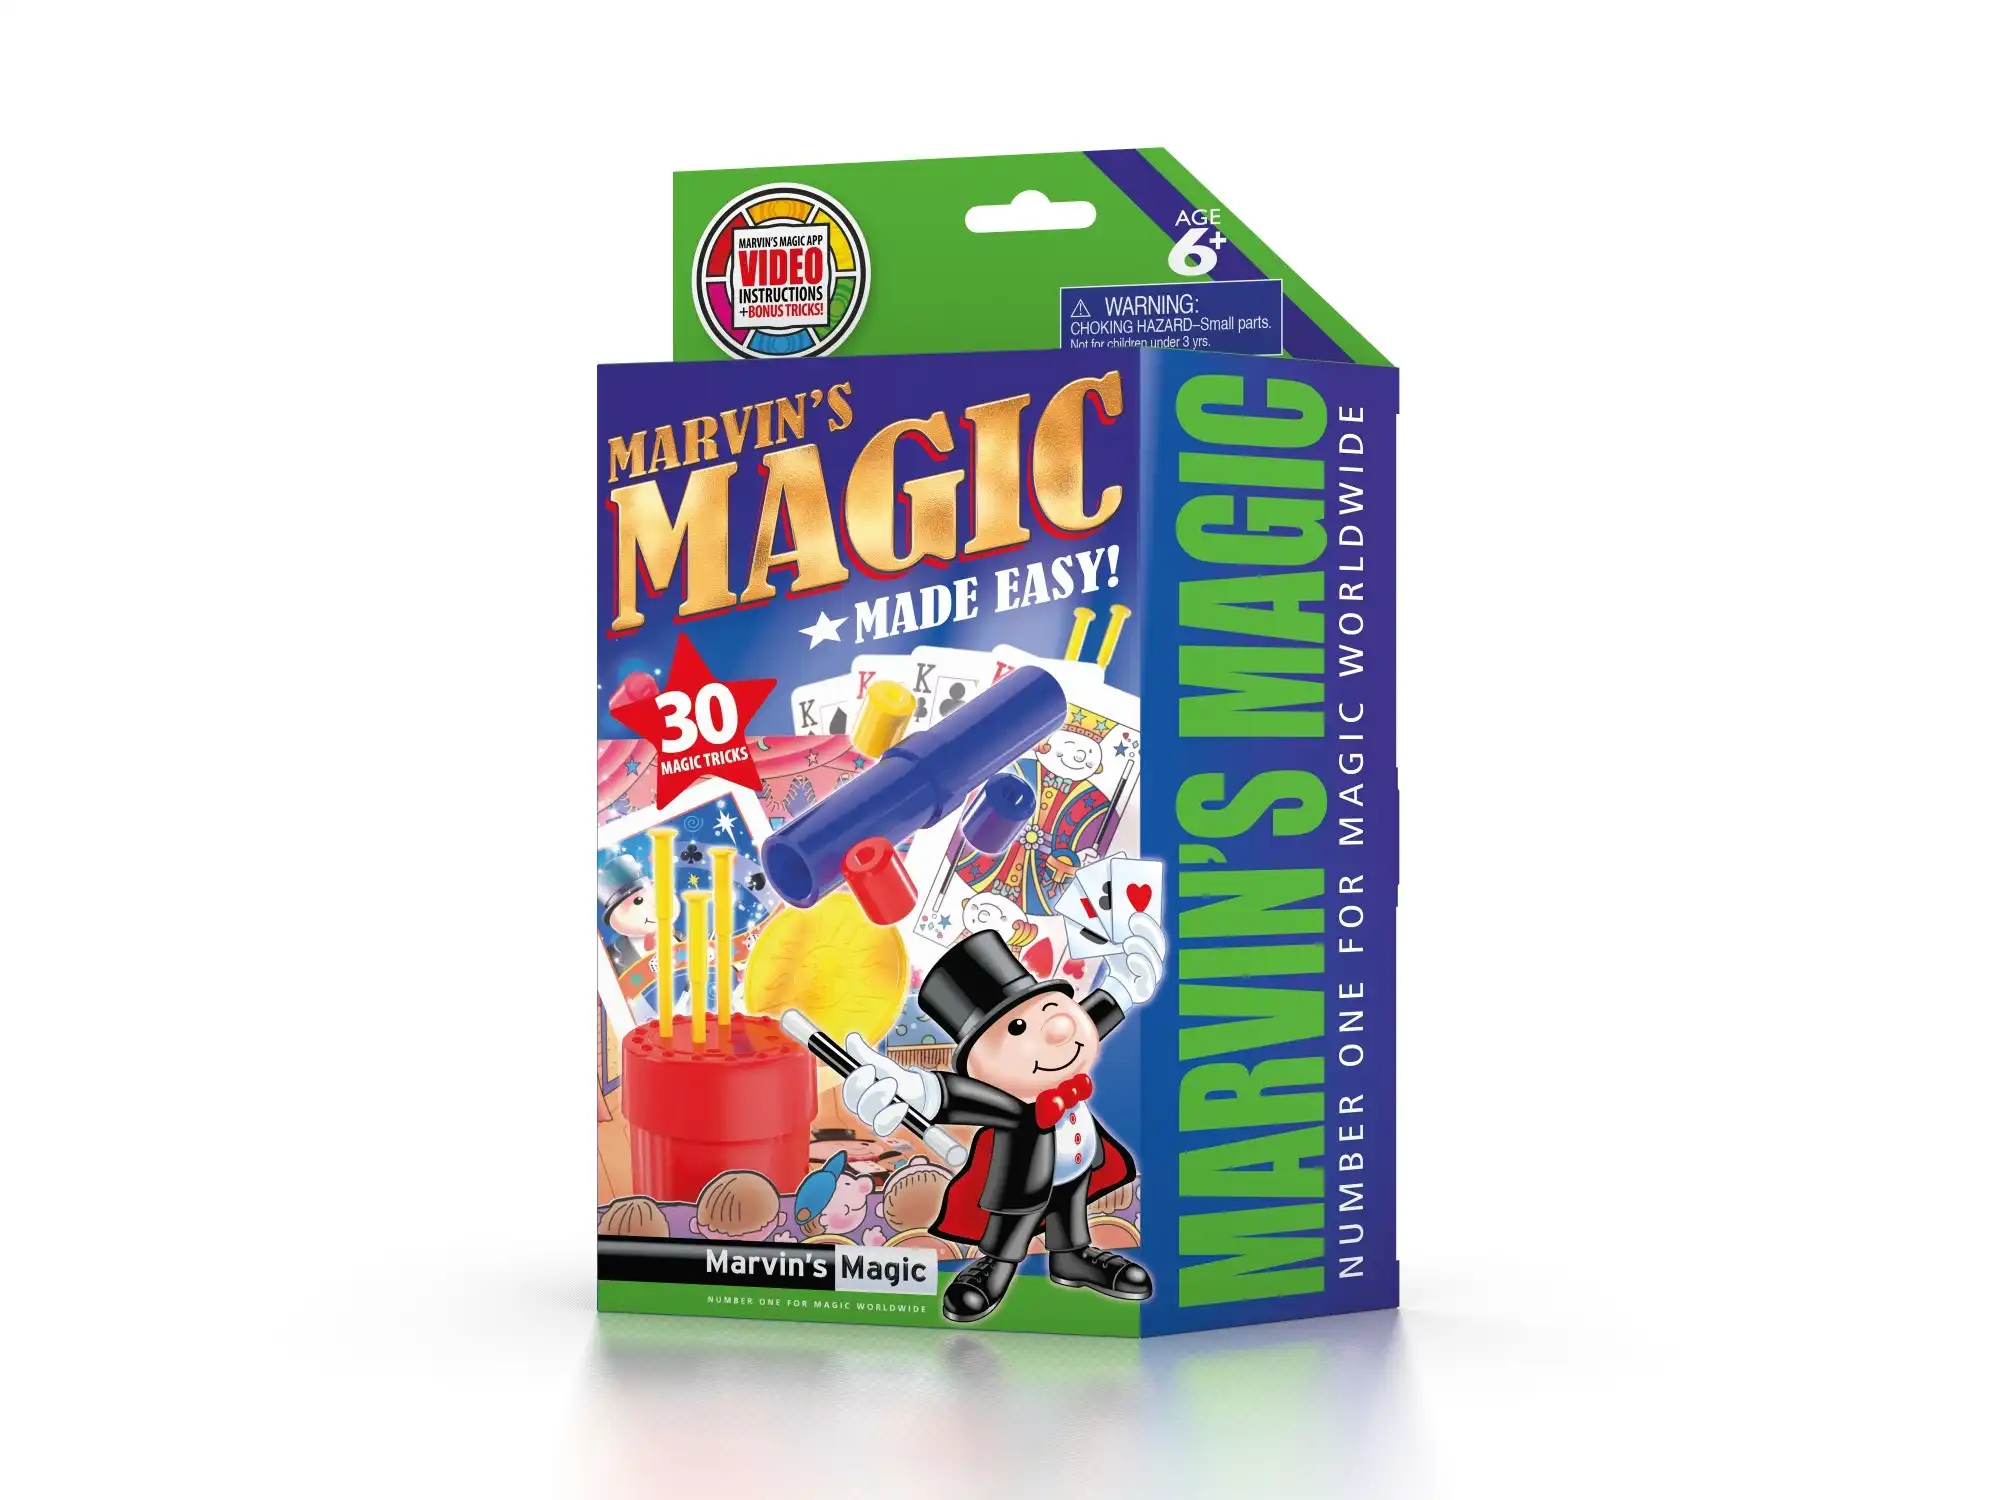 Marvin's Magic Amazing Tricks for beginners Set 2